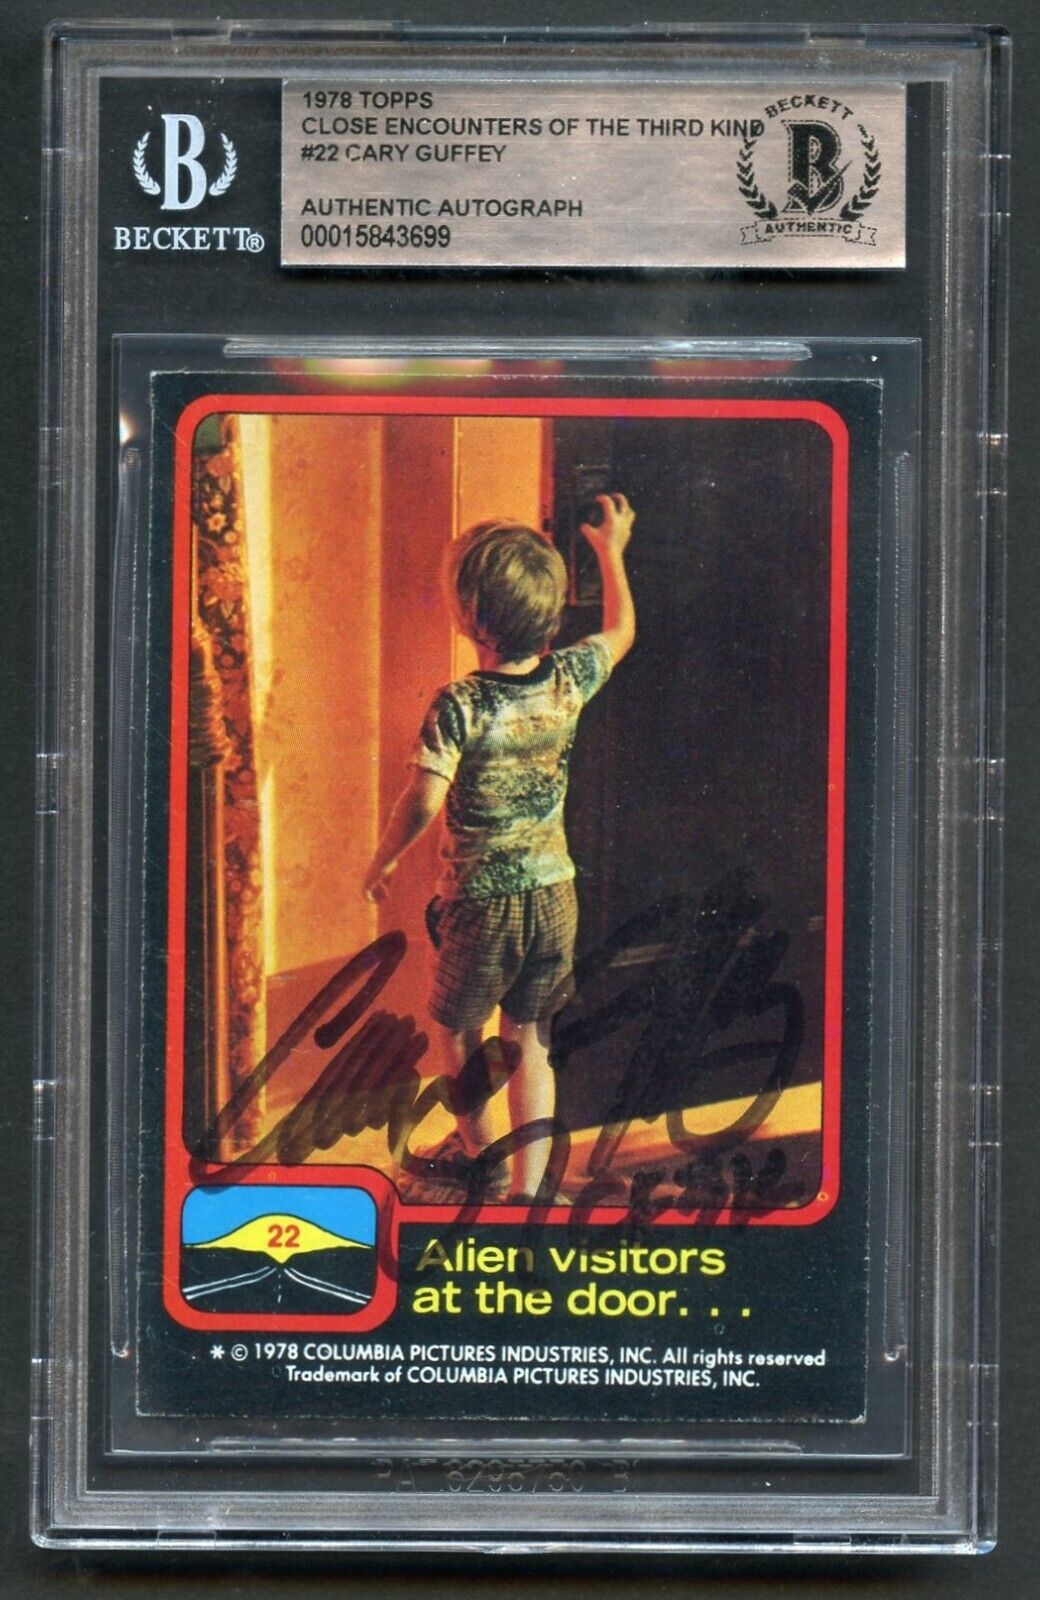 Cary Guffey #22 signed autograph 1978 Close Encounters of Third King Card BAS